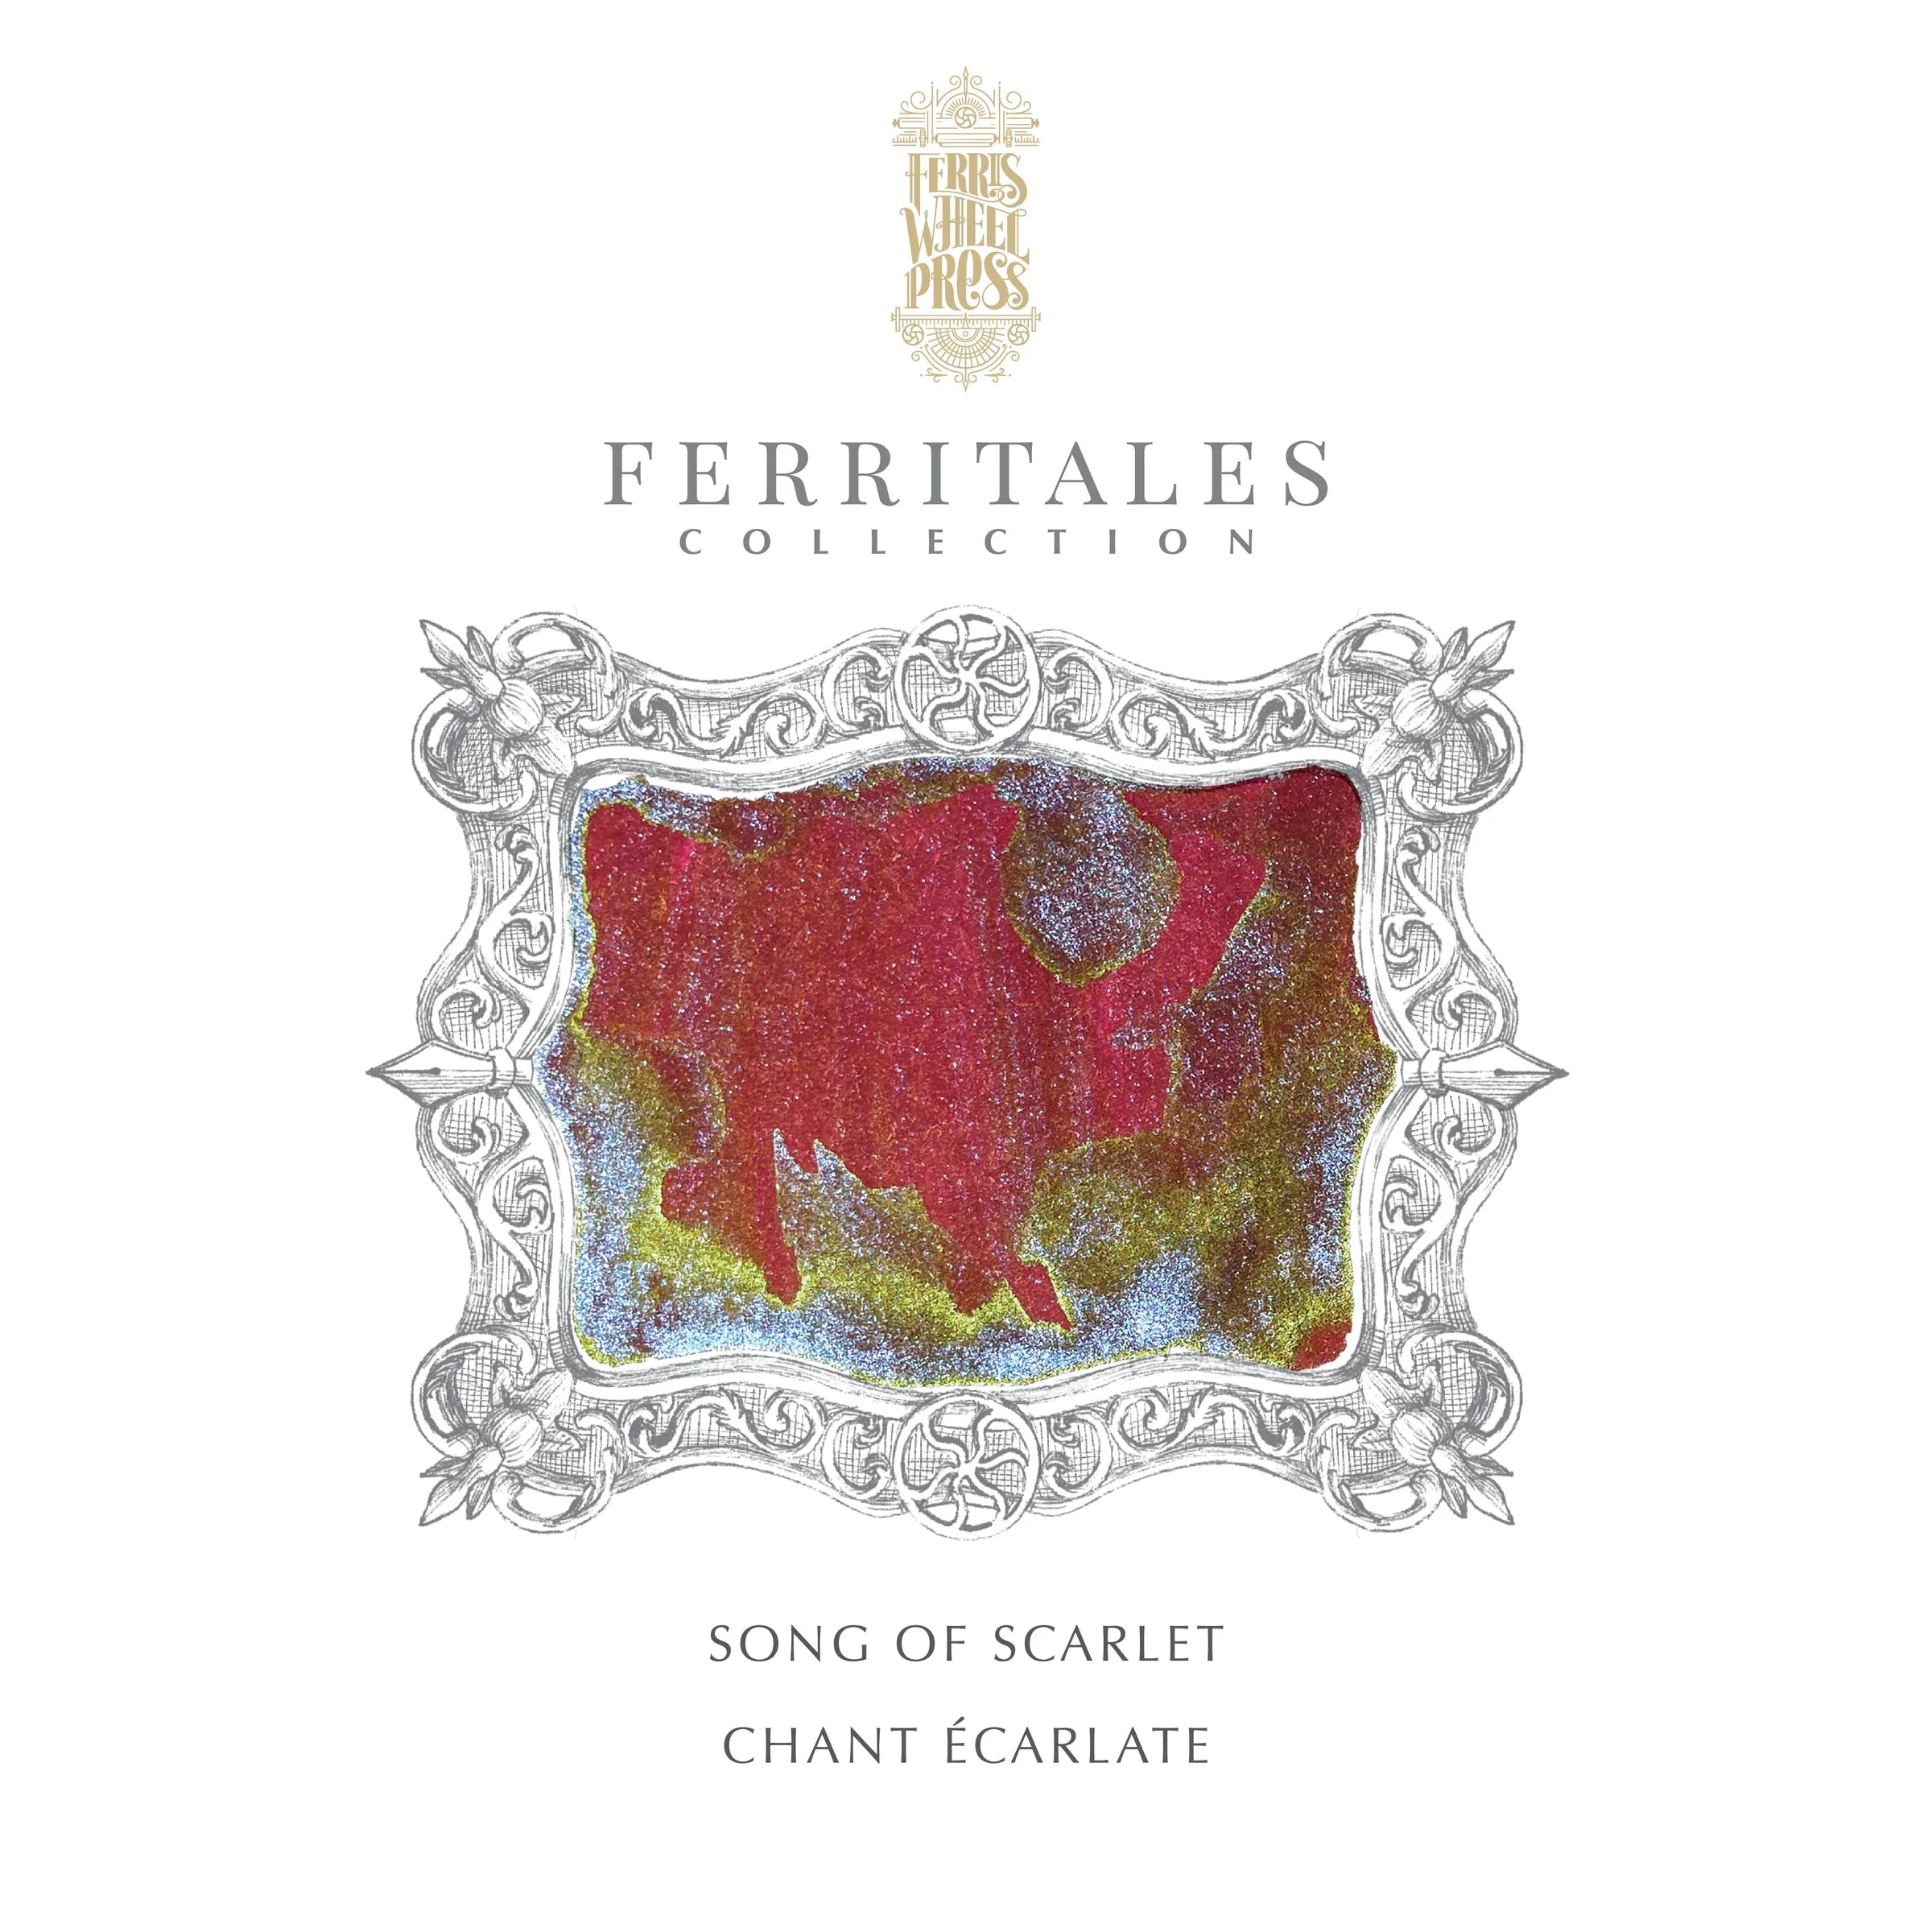 Ferris Wheel Press - FerriTales | Once Upon a Time - Song of Scarlet-Inkt-DutchMills